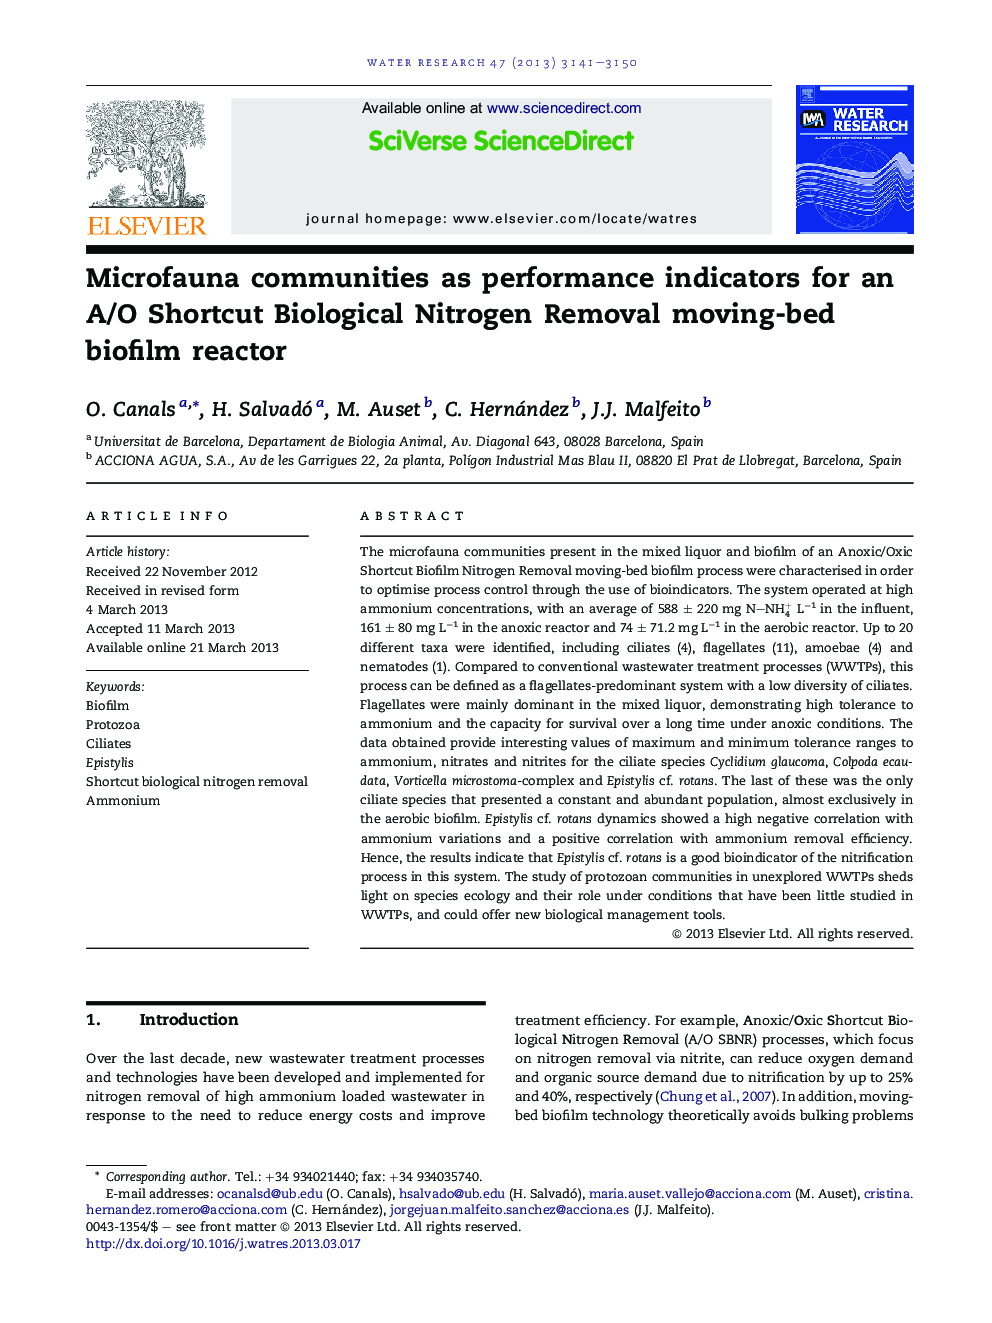 Microfauna communities as performance indicators for an A/O Shortcut Biological Nitrogen Removal moving-bed biofilm reactor